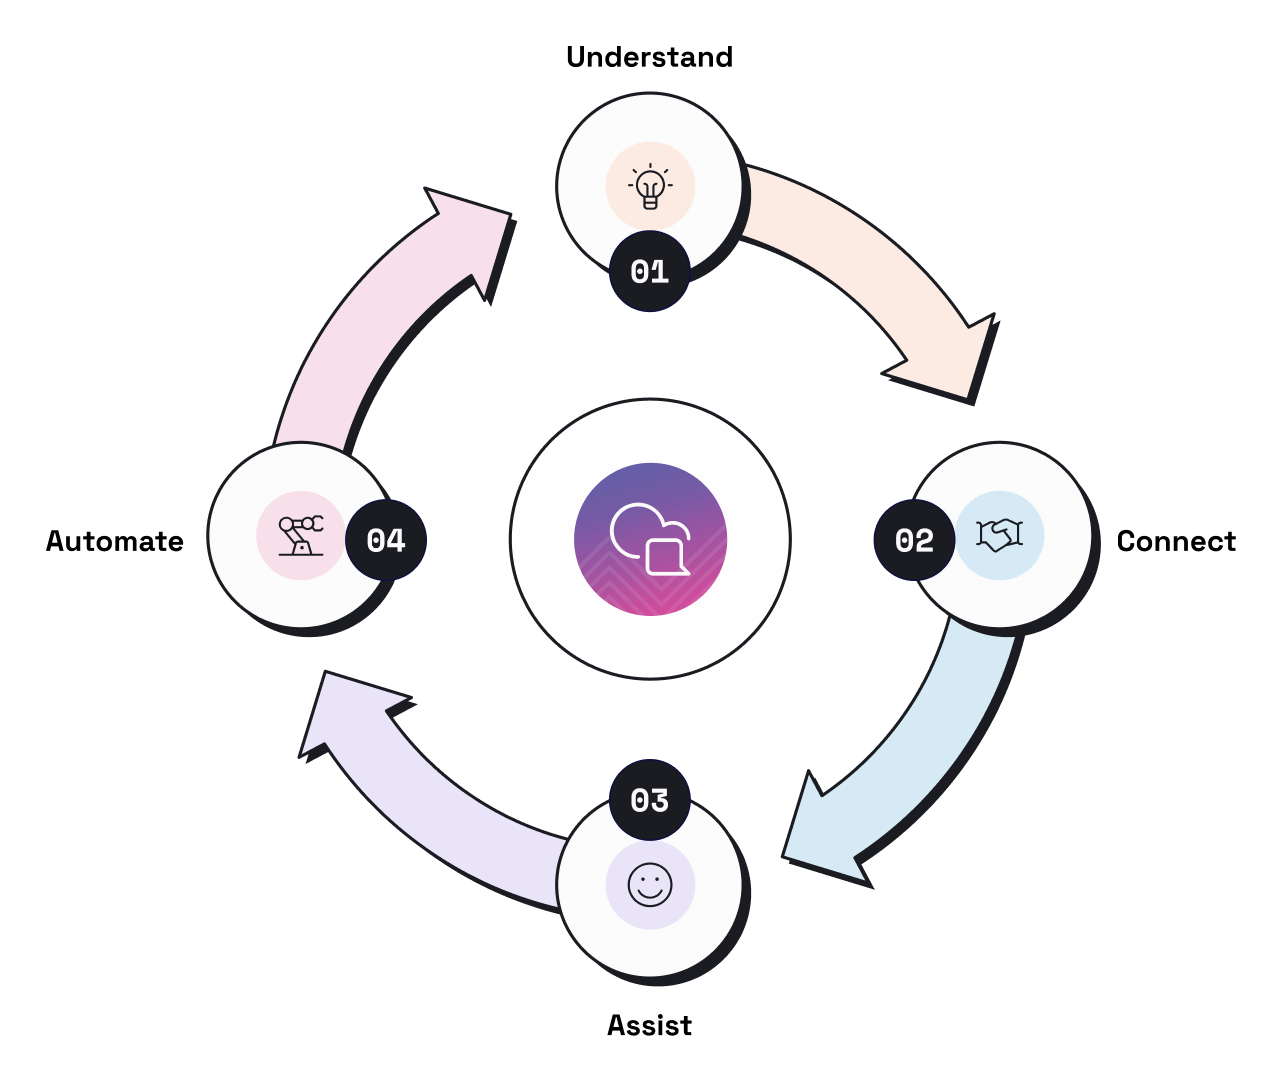 Conversational Flywheel illustration to help with digital transformation, showing the use of generative AI tools across the customer journey